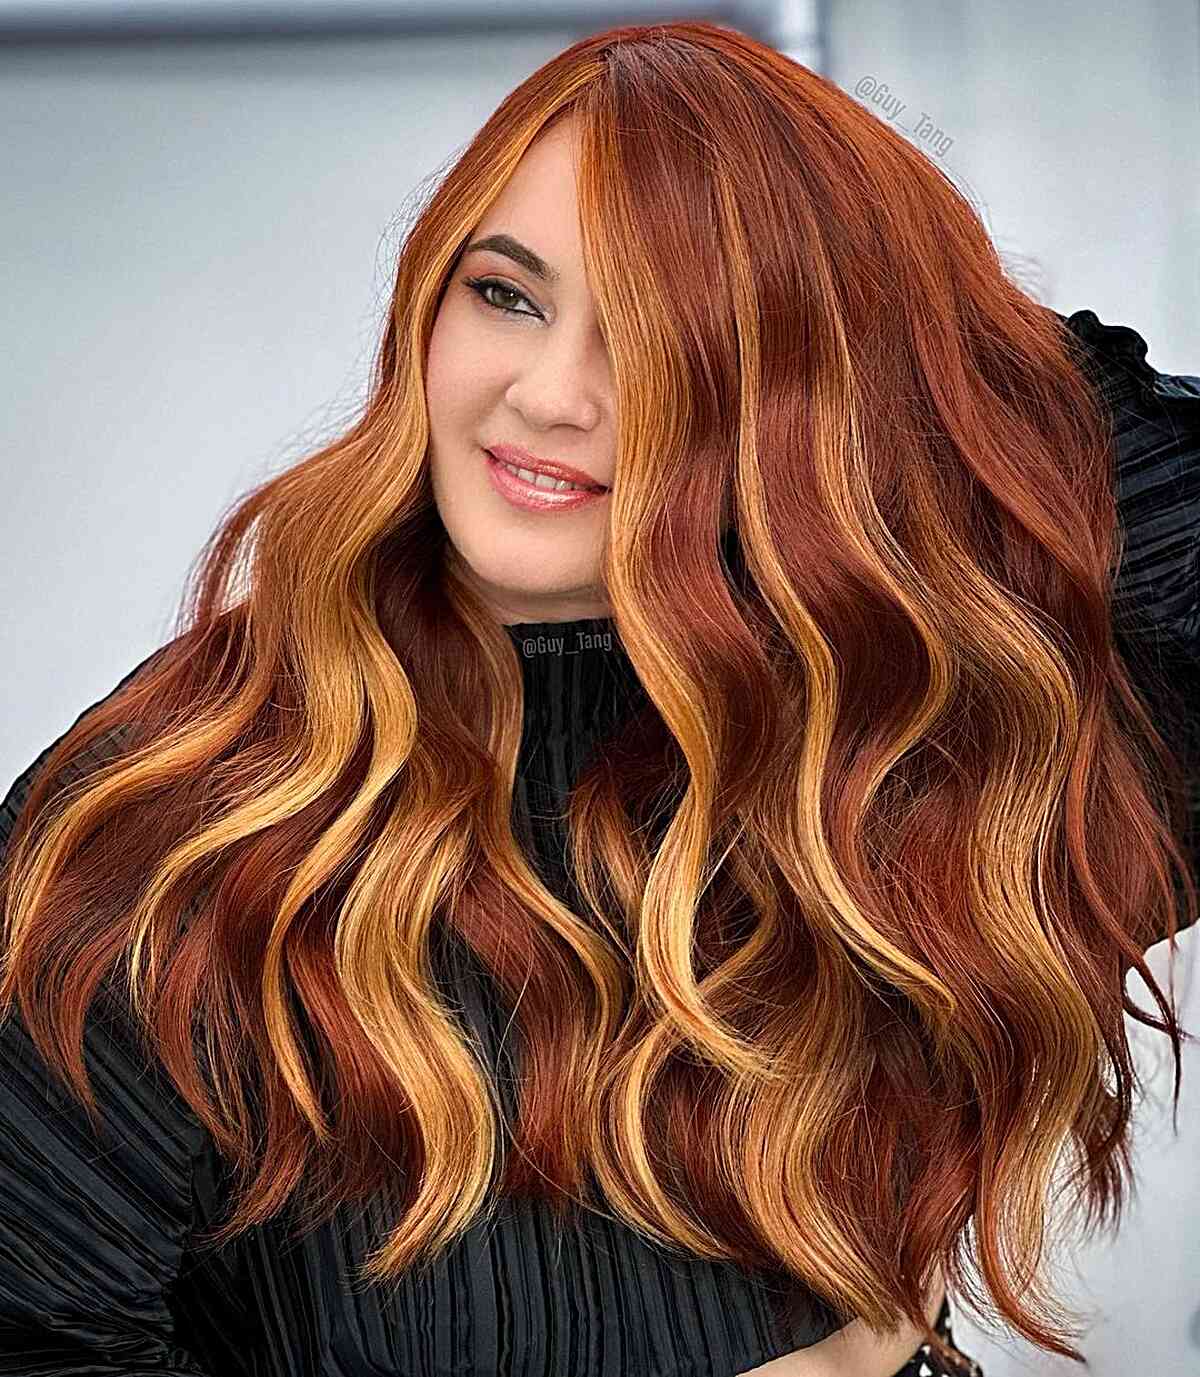 Spiced-Up Red and Blonde Highlights